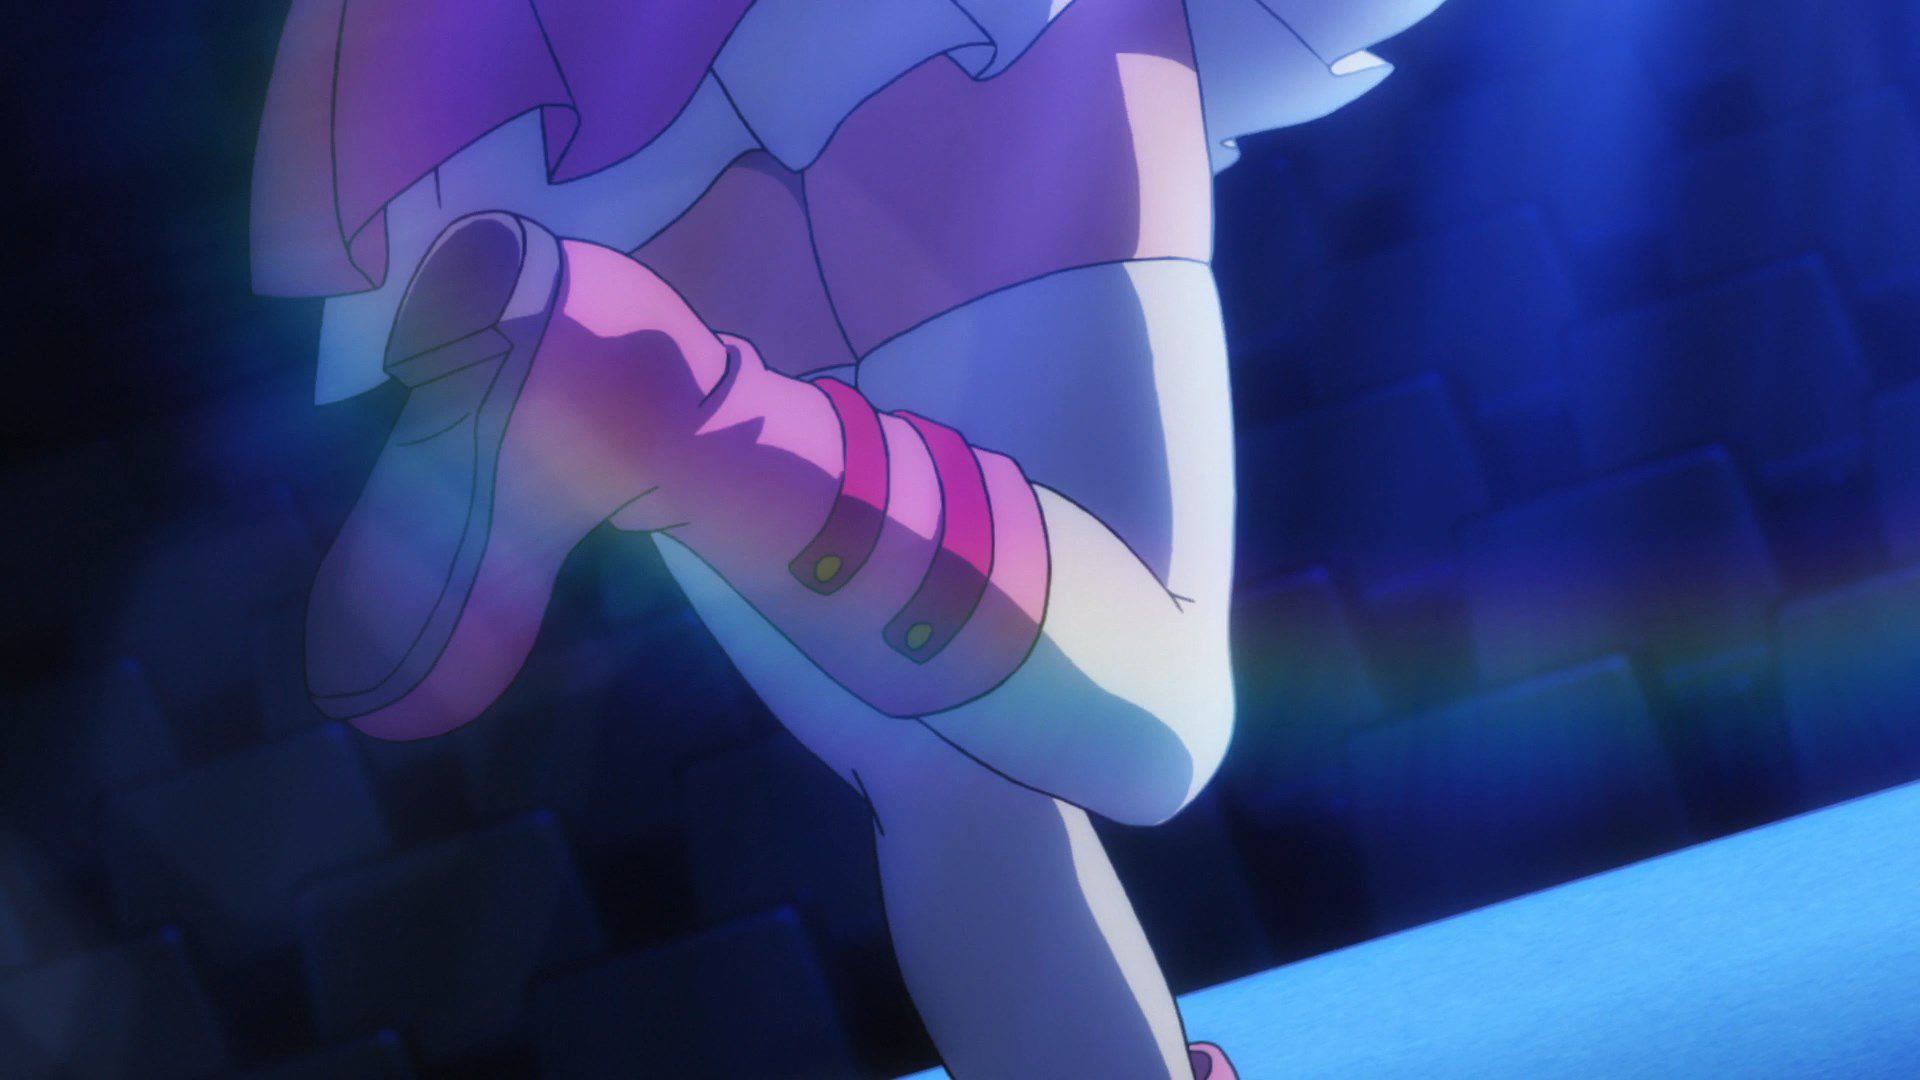 [God images] "love live! ' Μm ' PV's leg is too erotic everyone wakes up to a leg fetish of wwwww 38